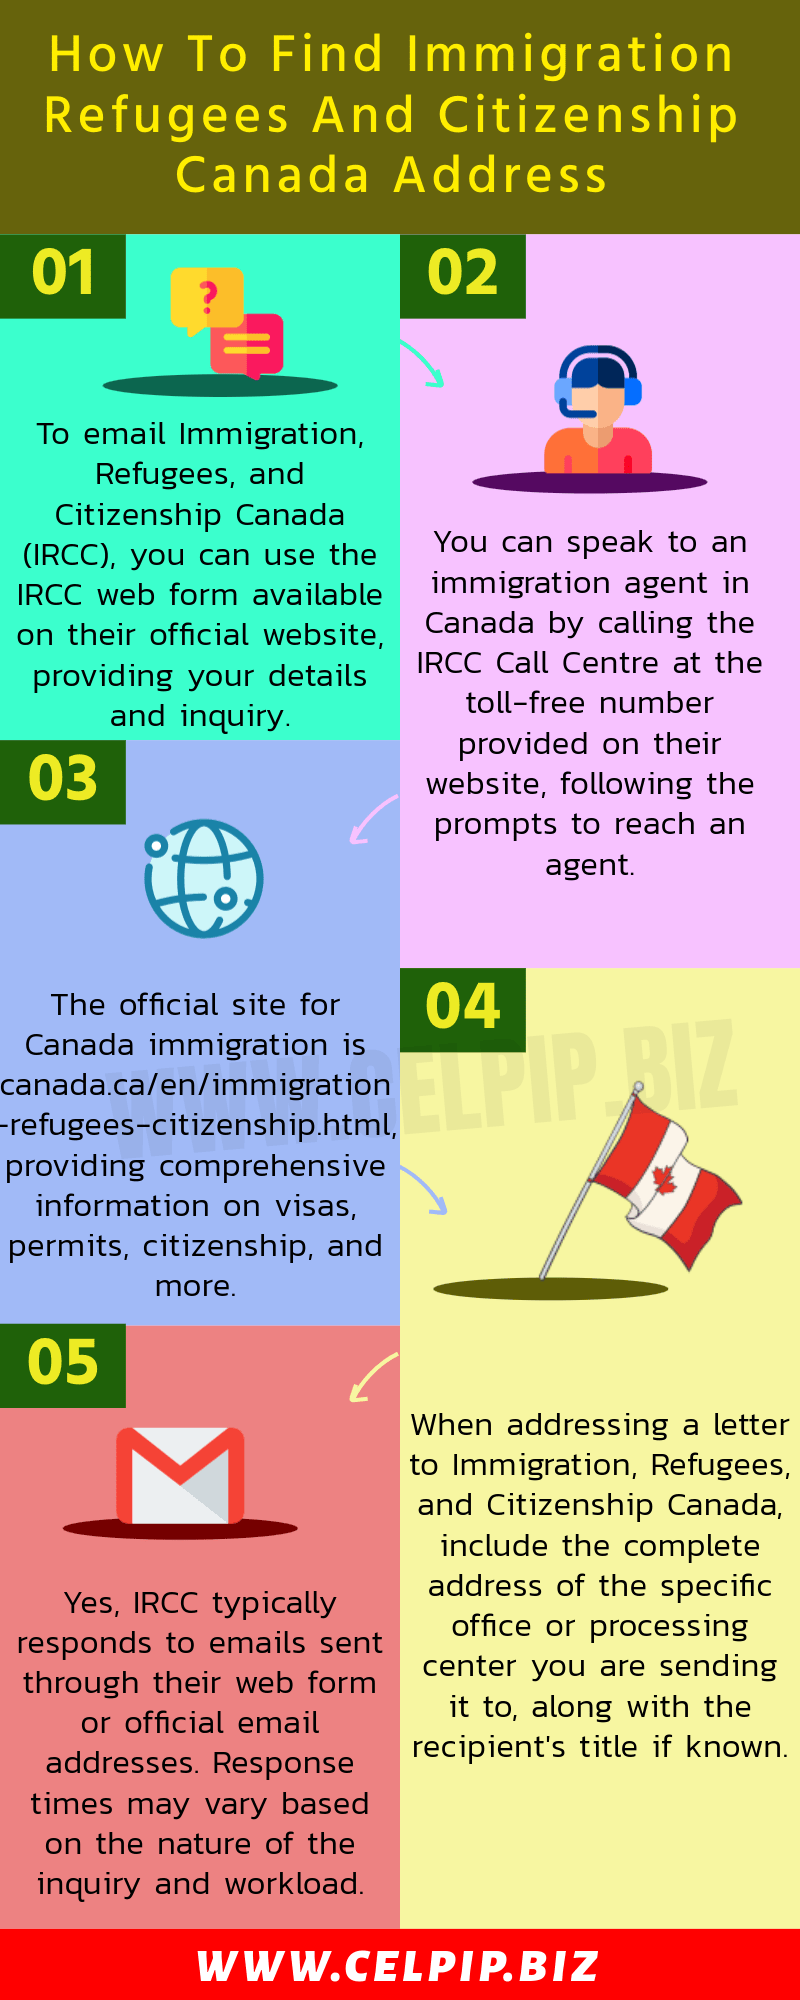 Immigration Refugee and Citizenship Canada